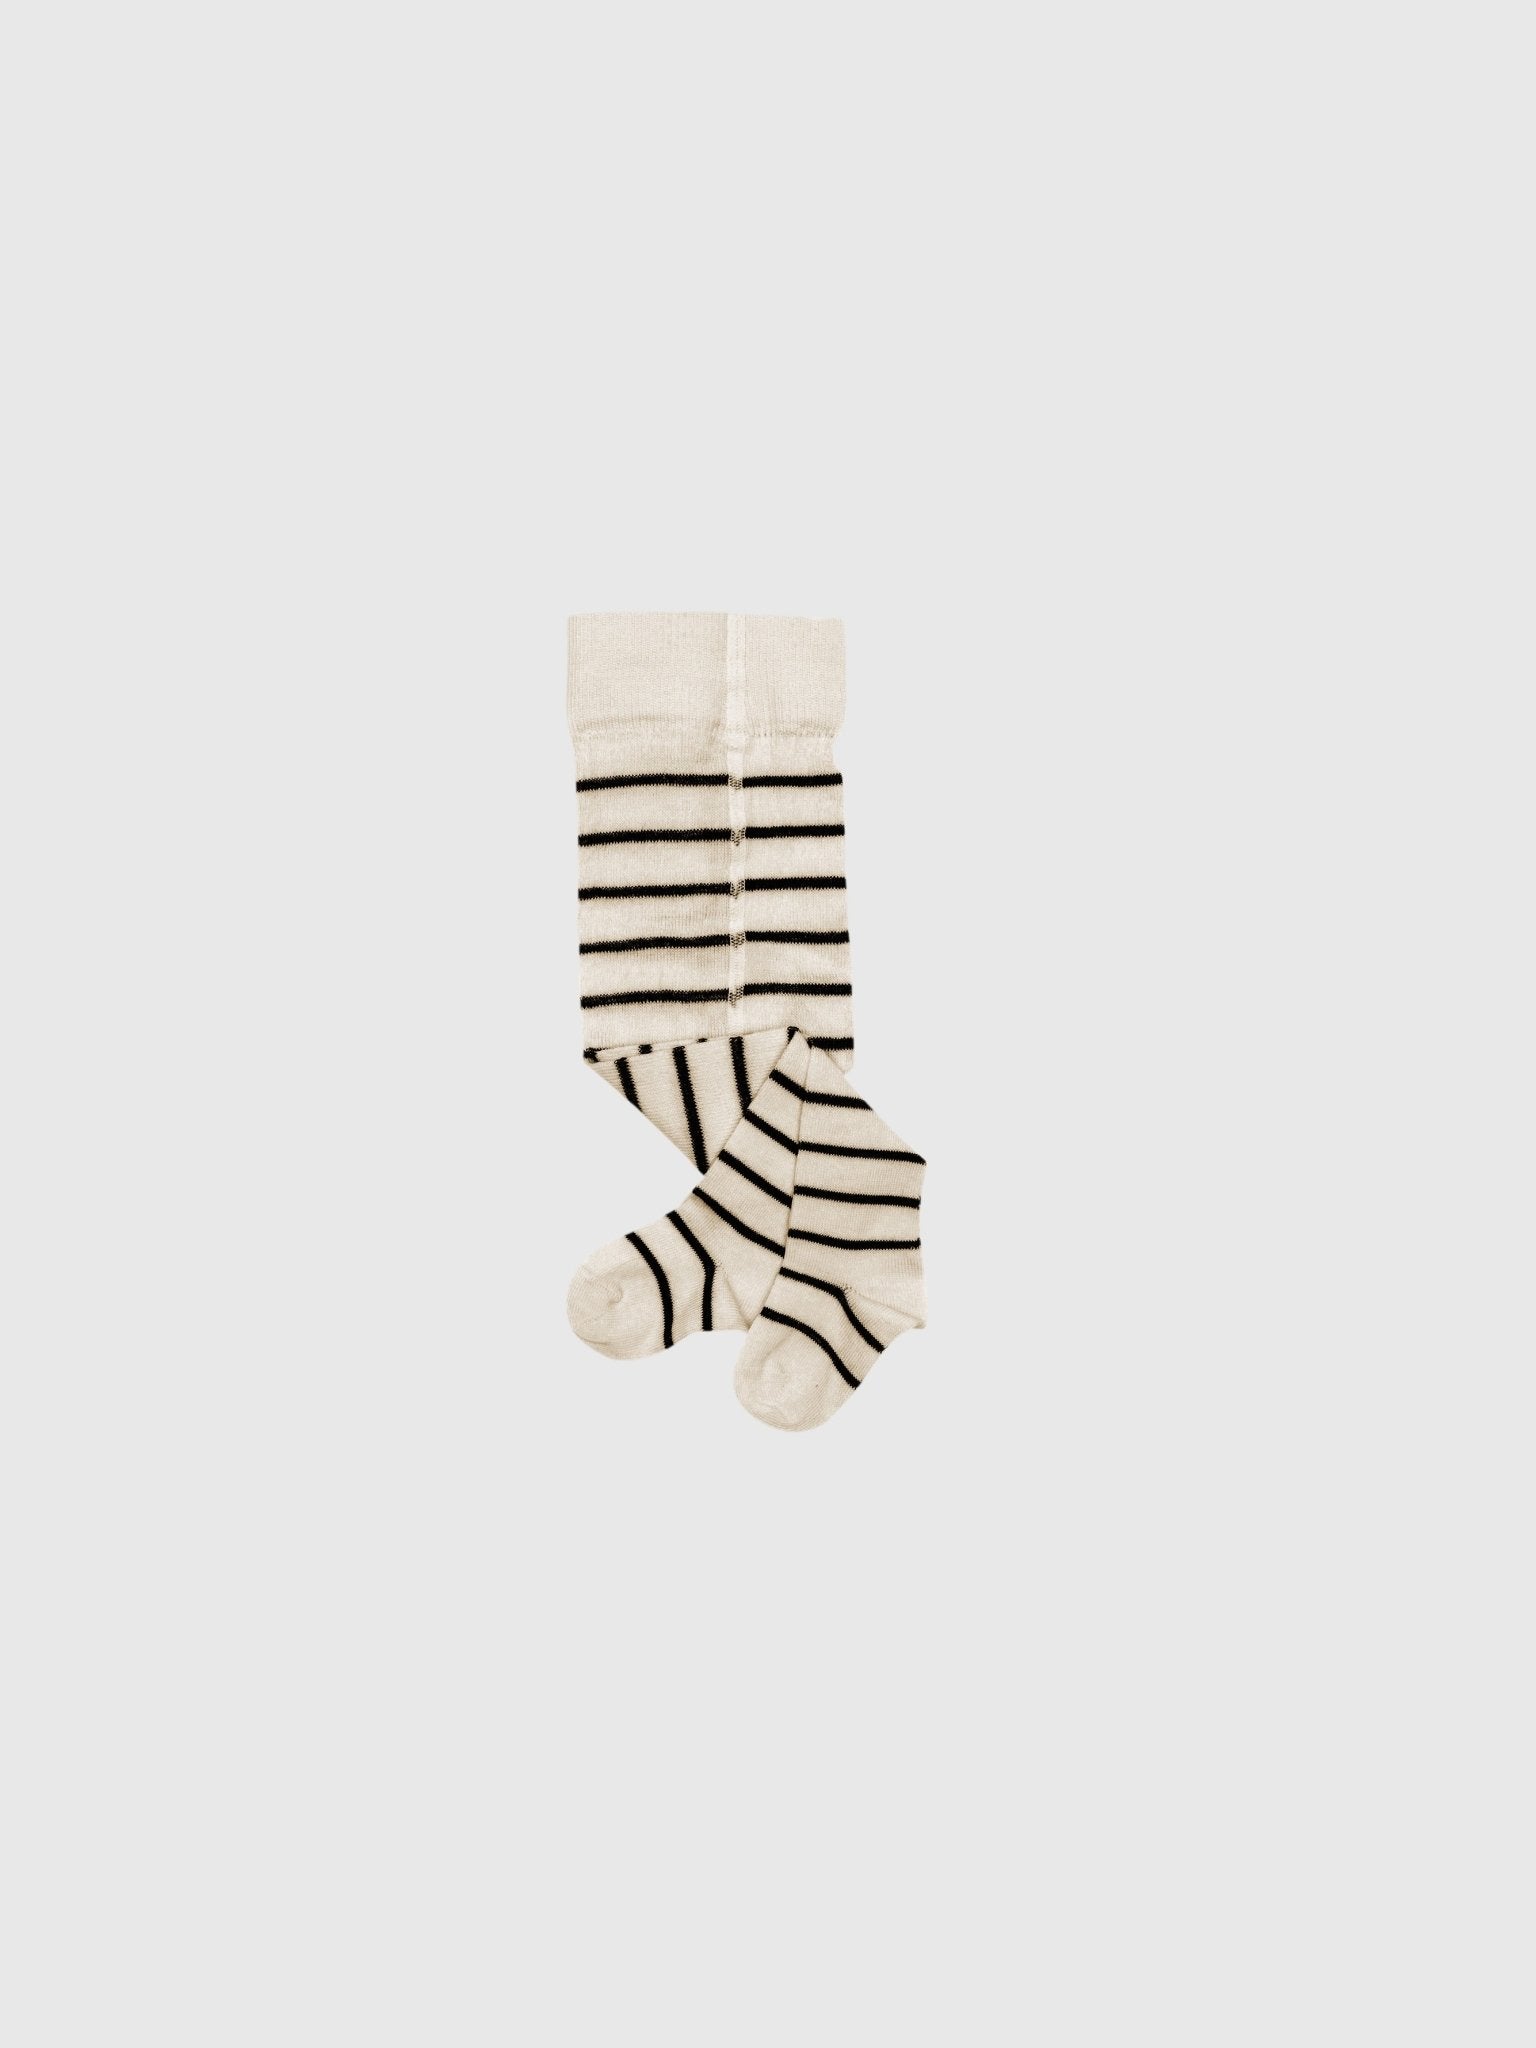 Childs Brown and White Striped Tights